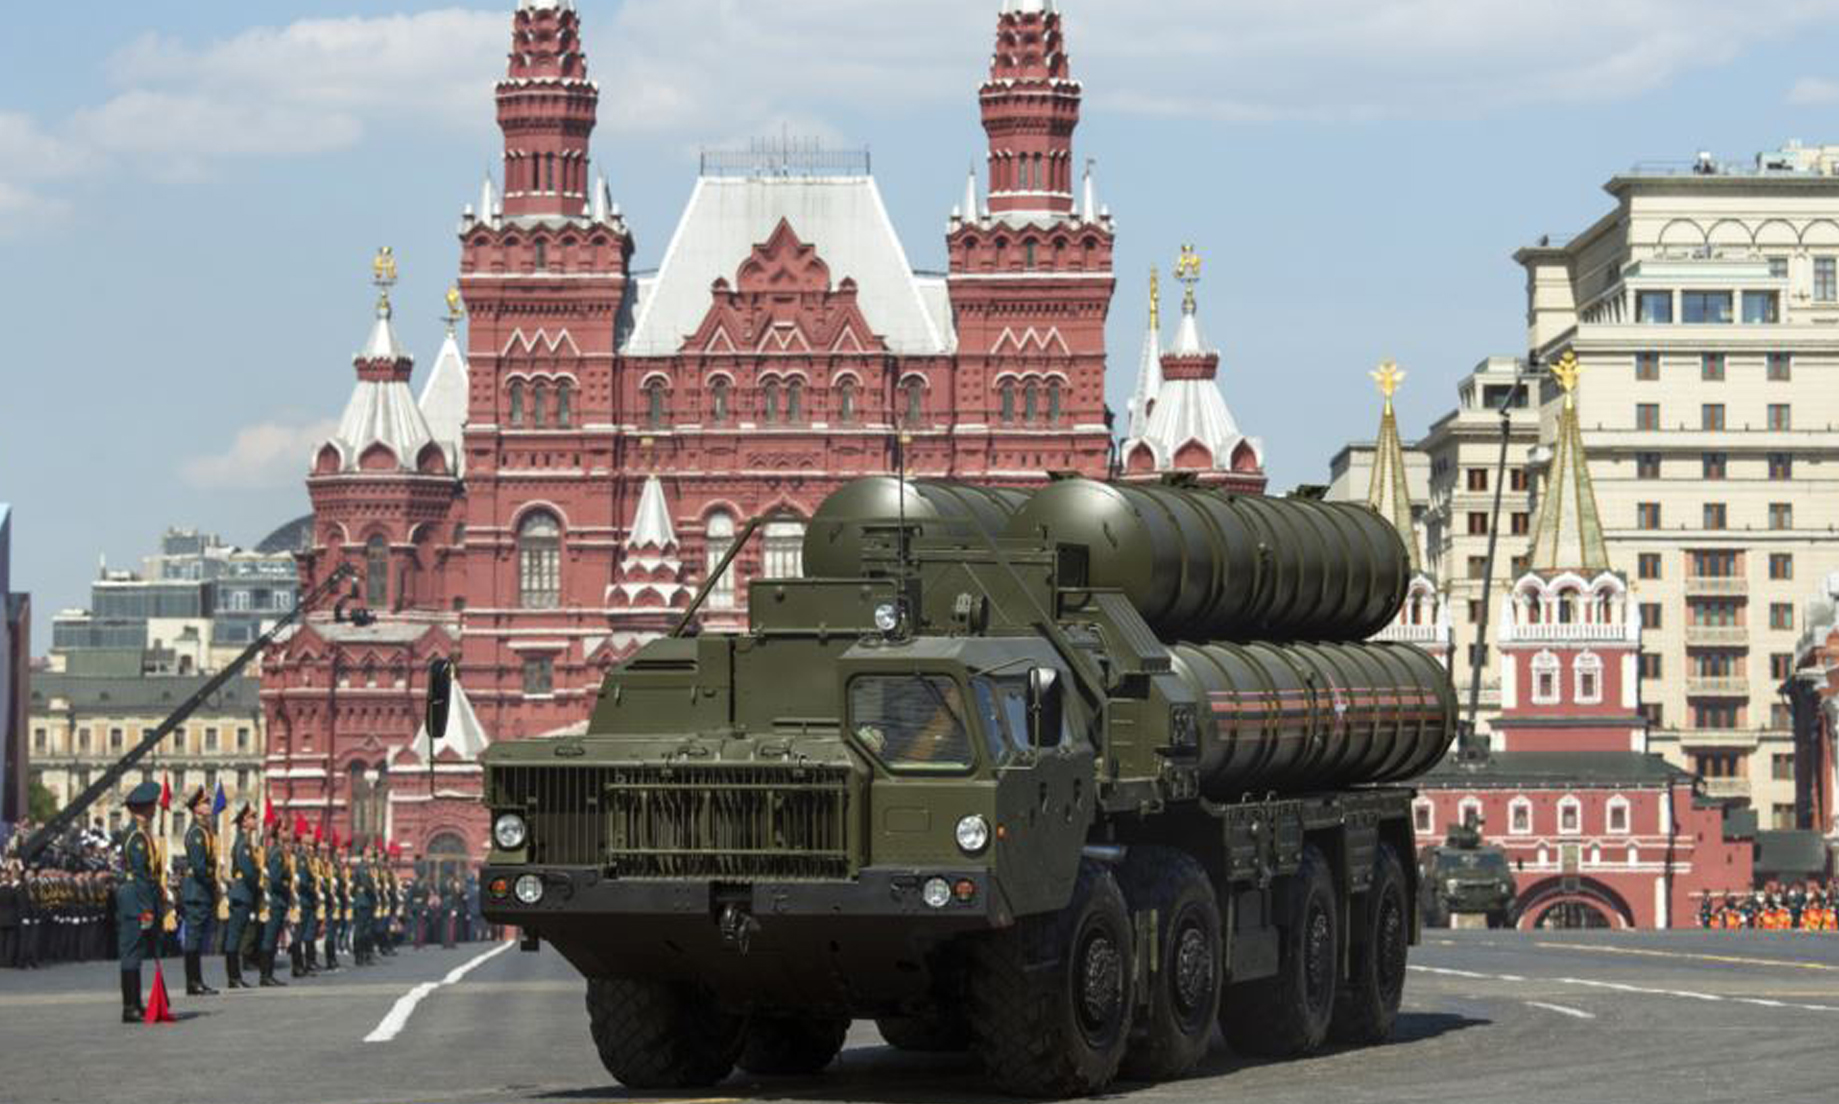 Russia Ready To Consider Selling More S-400 Missiles To Turkey: Kremlin